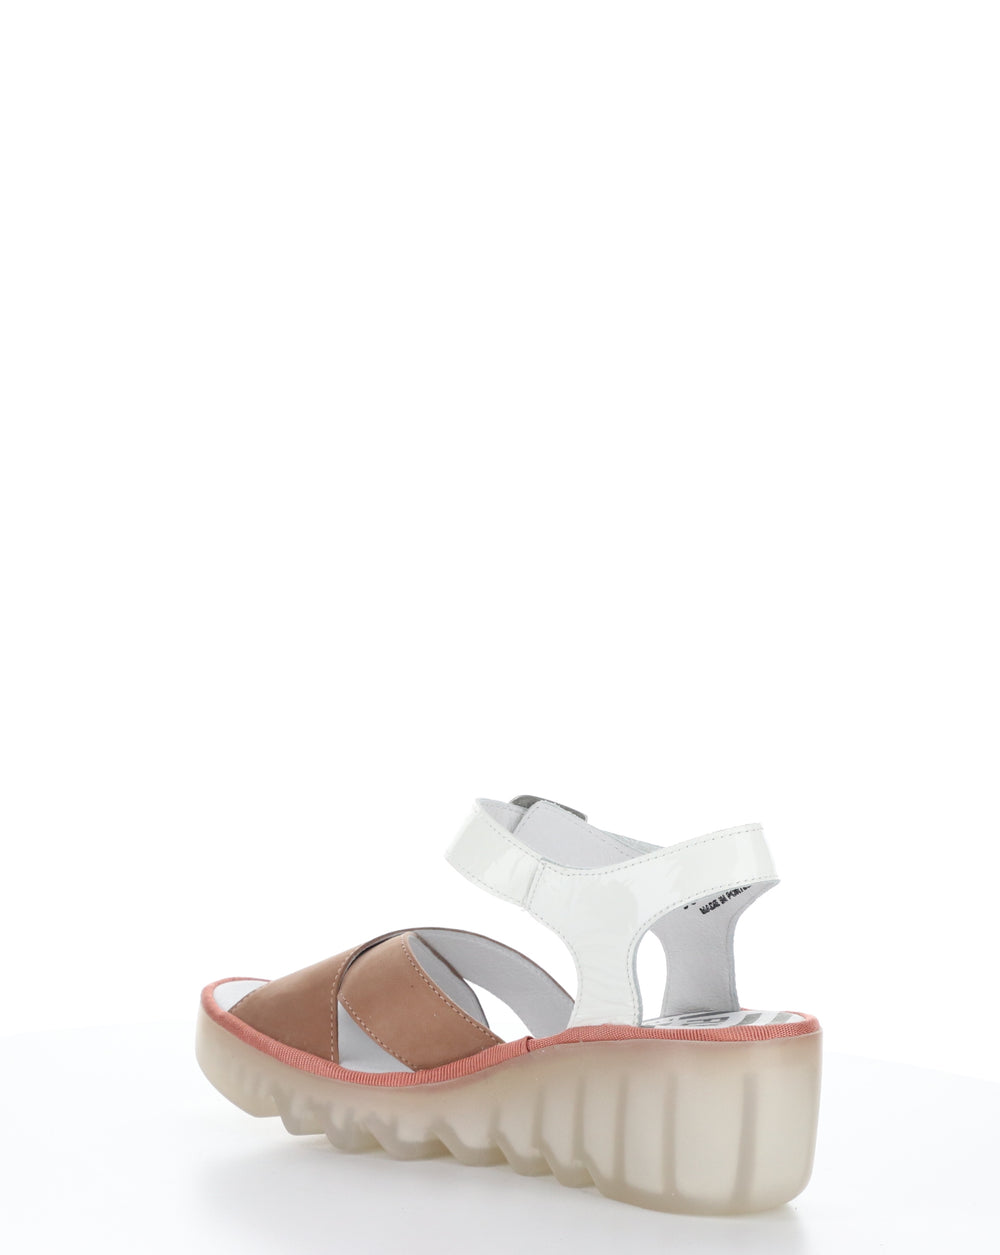 BACE411FLY 001 PINK/OFF WHITE Round toe Sandals